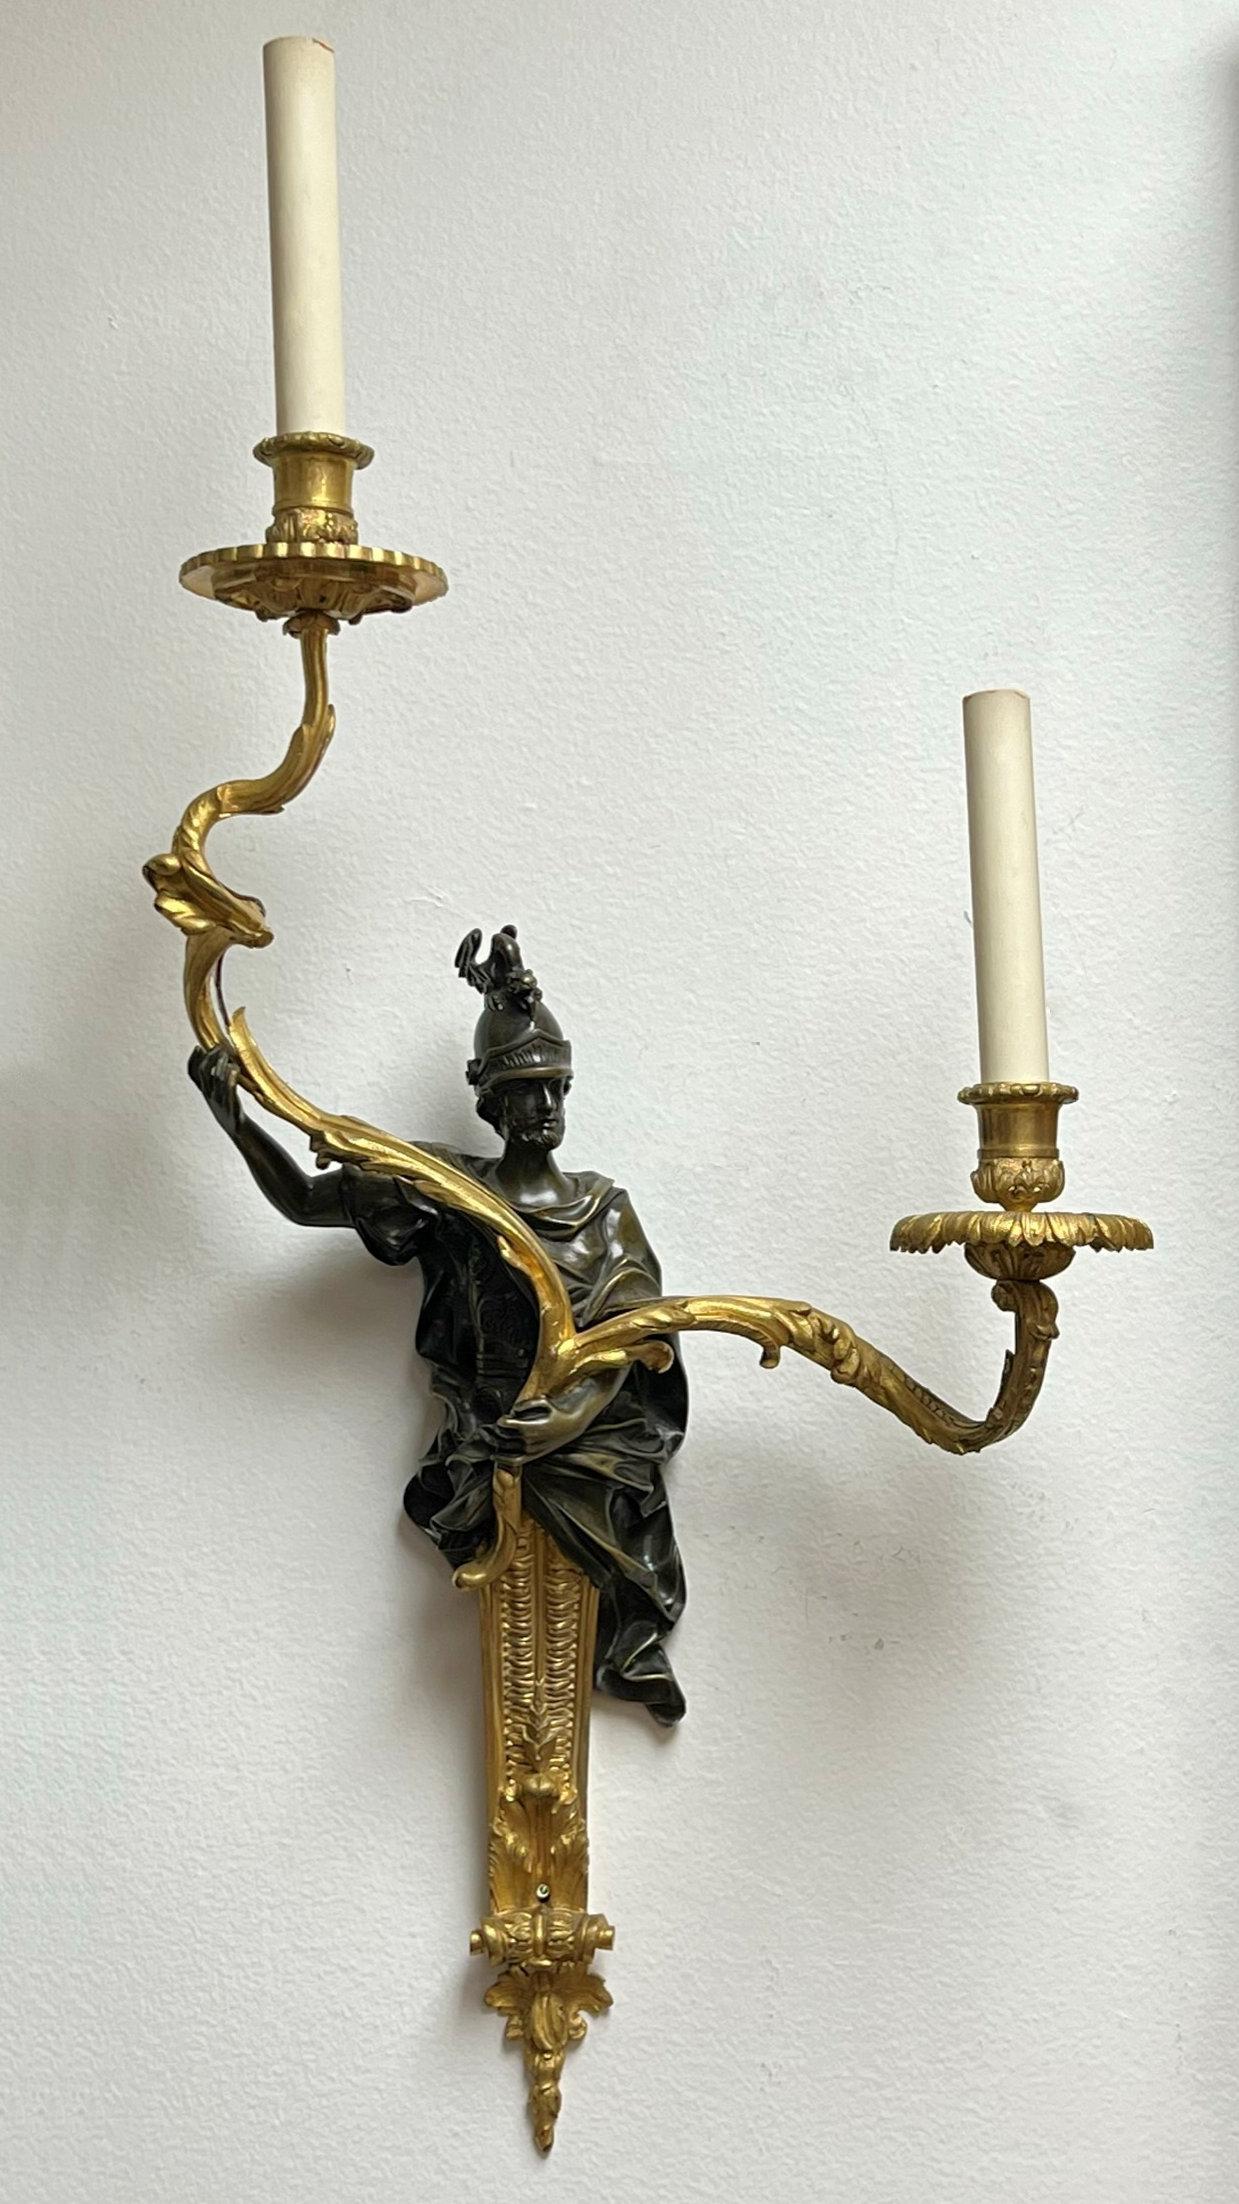 Our pair of gilt bronze sconces with the patinated figures of Greek or Roman warriors Measure 23 by 13 by 6.75 inches and have two candle arms with candelabra Size sockets. Apparently unsigned. In need of new wiring.